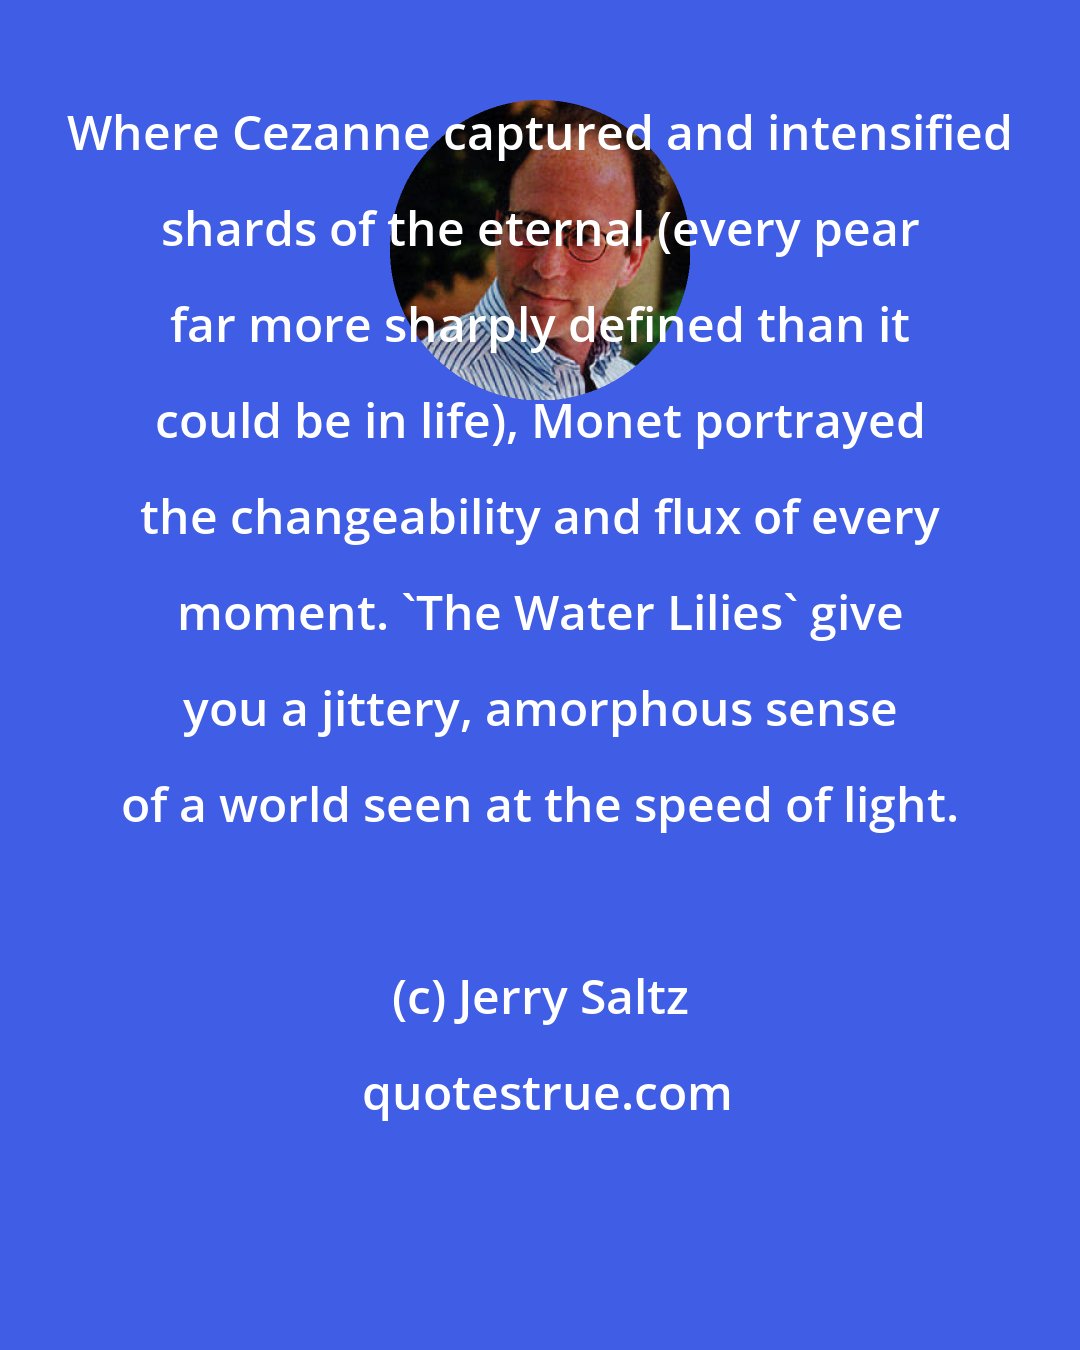 Jerry Saltz: Where Cezanne captured and intensified shards of the eternal (every pear far more sharply defined than it could be in life), Monet portrayed the changeability and flux of every moment. 'The Water Lilies' give you a jittery, amorphous sense of a world seen at the speed of light.